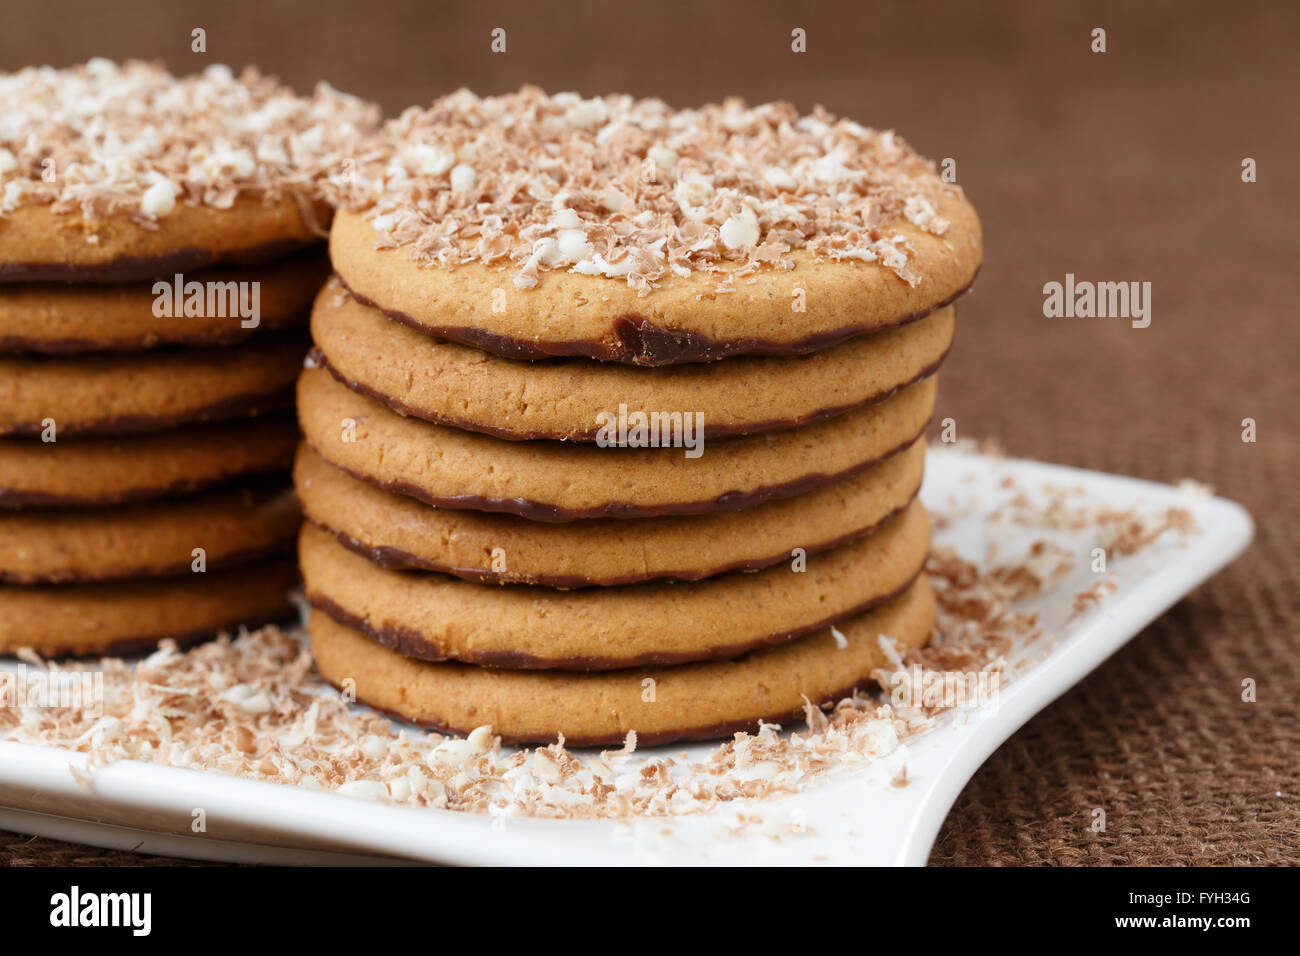 Round cookies with chocolate in a plate Stock Photo